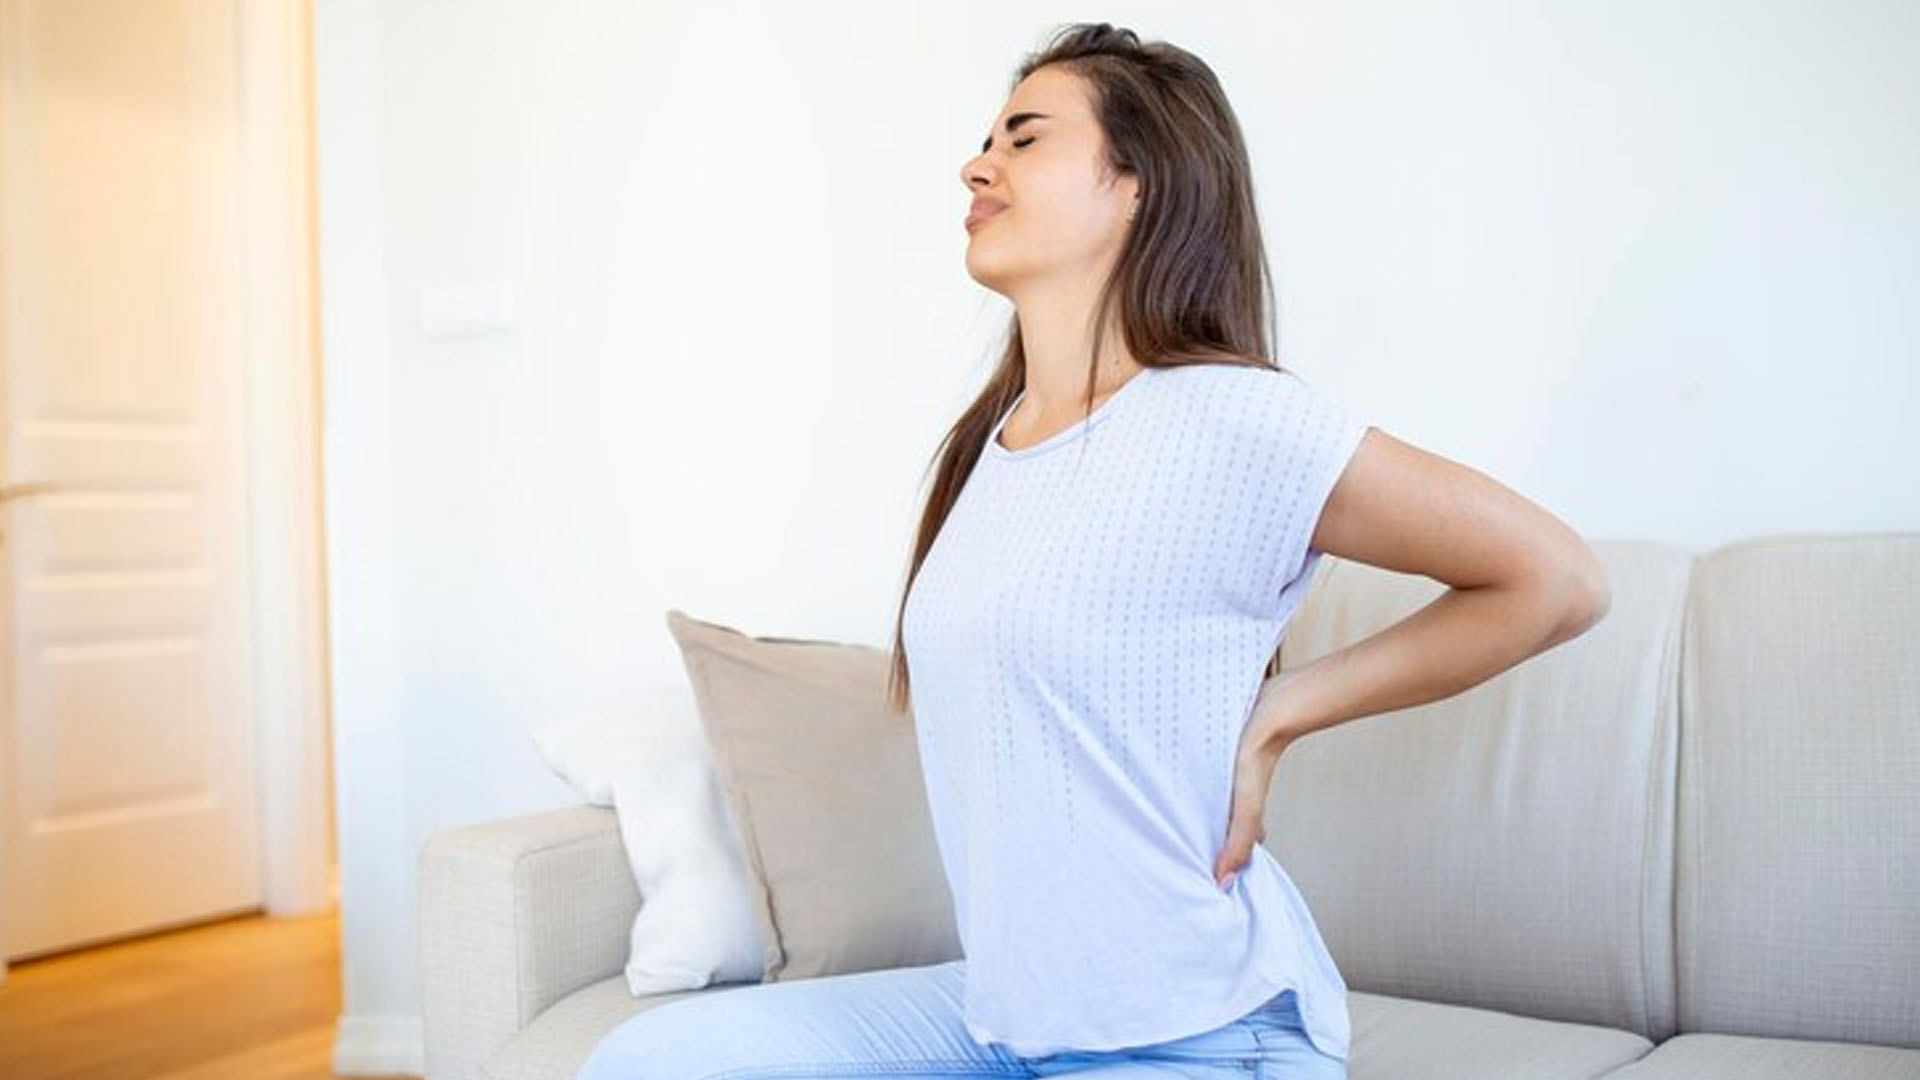 What are the Home Remedies for Rib Pain?